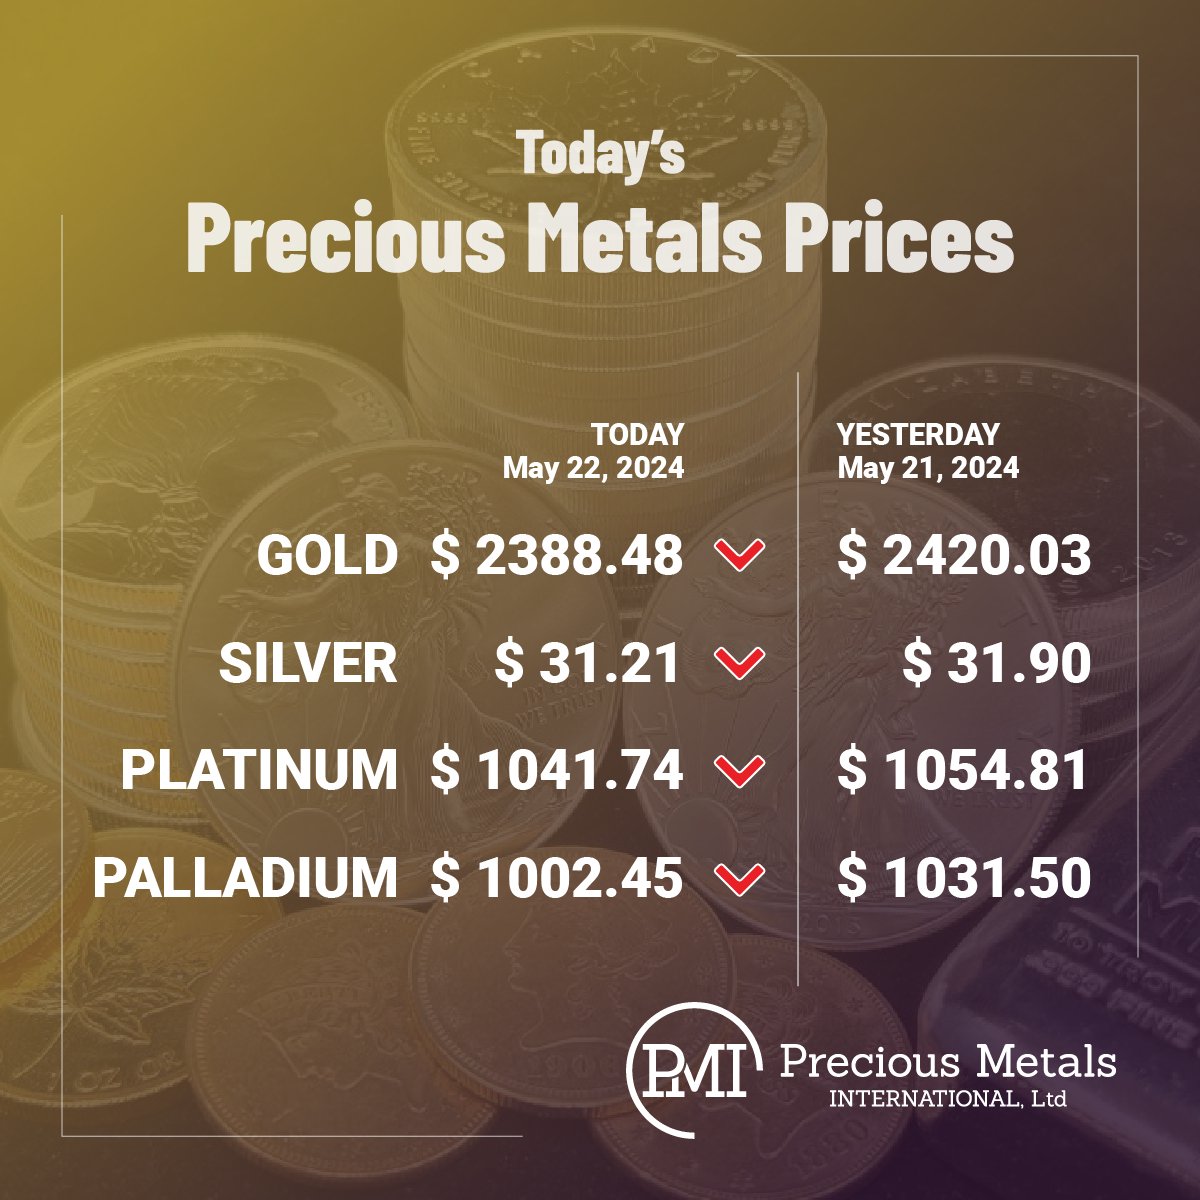 Today’s precious metals prices as of Wednesday, May 22nd, 2024.
·
·
·
#BullionPMI #Gold #Silver #Platinum #Palladium #PreciousMetals #Prices #BuyGold #BuySilver #InGoldWeTrust 🥇💛🟡🌕🟨🪙⬜️🔘◻️📈✨🤯👍🏼🔥